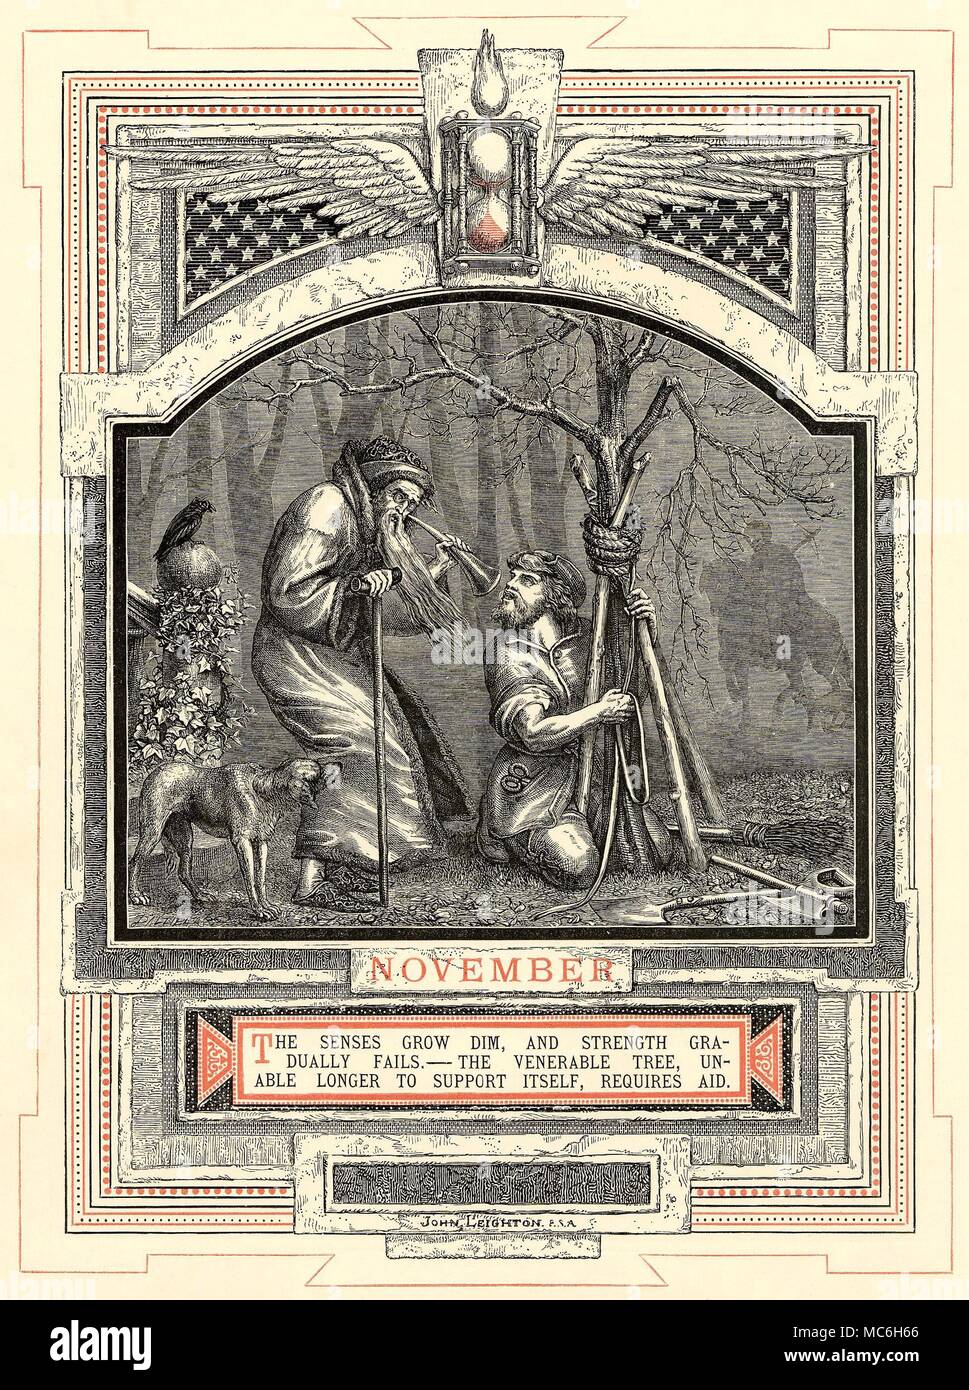 ASTROLOGY - MONTHS OF THE YEAR - NOVEMBER The month of November, from the series by John Leighton, The Life of Man, 1866. The twelve signs (in this case Scorpio) are associated with each of the months during which the Sun is in this zodiac sign. A distinctive stage in the twelve stages of Man's life is also linked with the image - in this case, November is linked with the Censor and the Old Man. By the eleventh month of the year, the winged hour-glass is virtually depleted. The theme is of age and restriction - the man cannot hear, the Ivy smothers the balustrade, the sapling needs supp Stock Photo